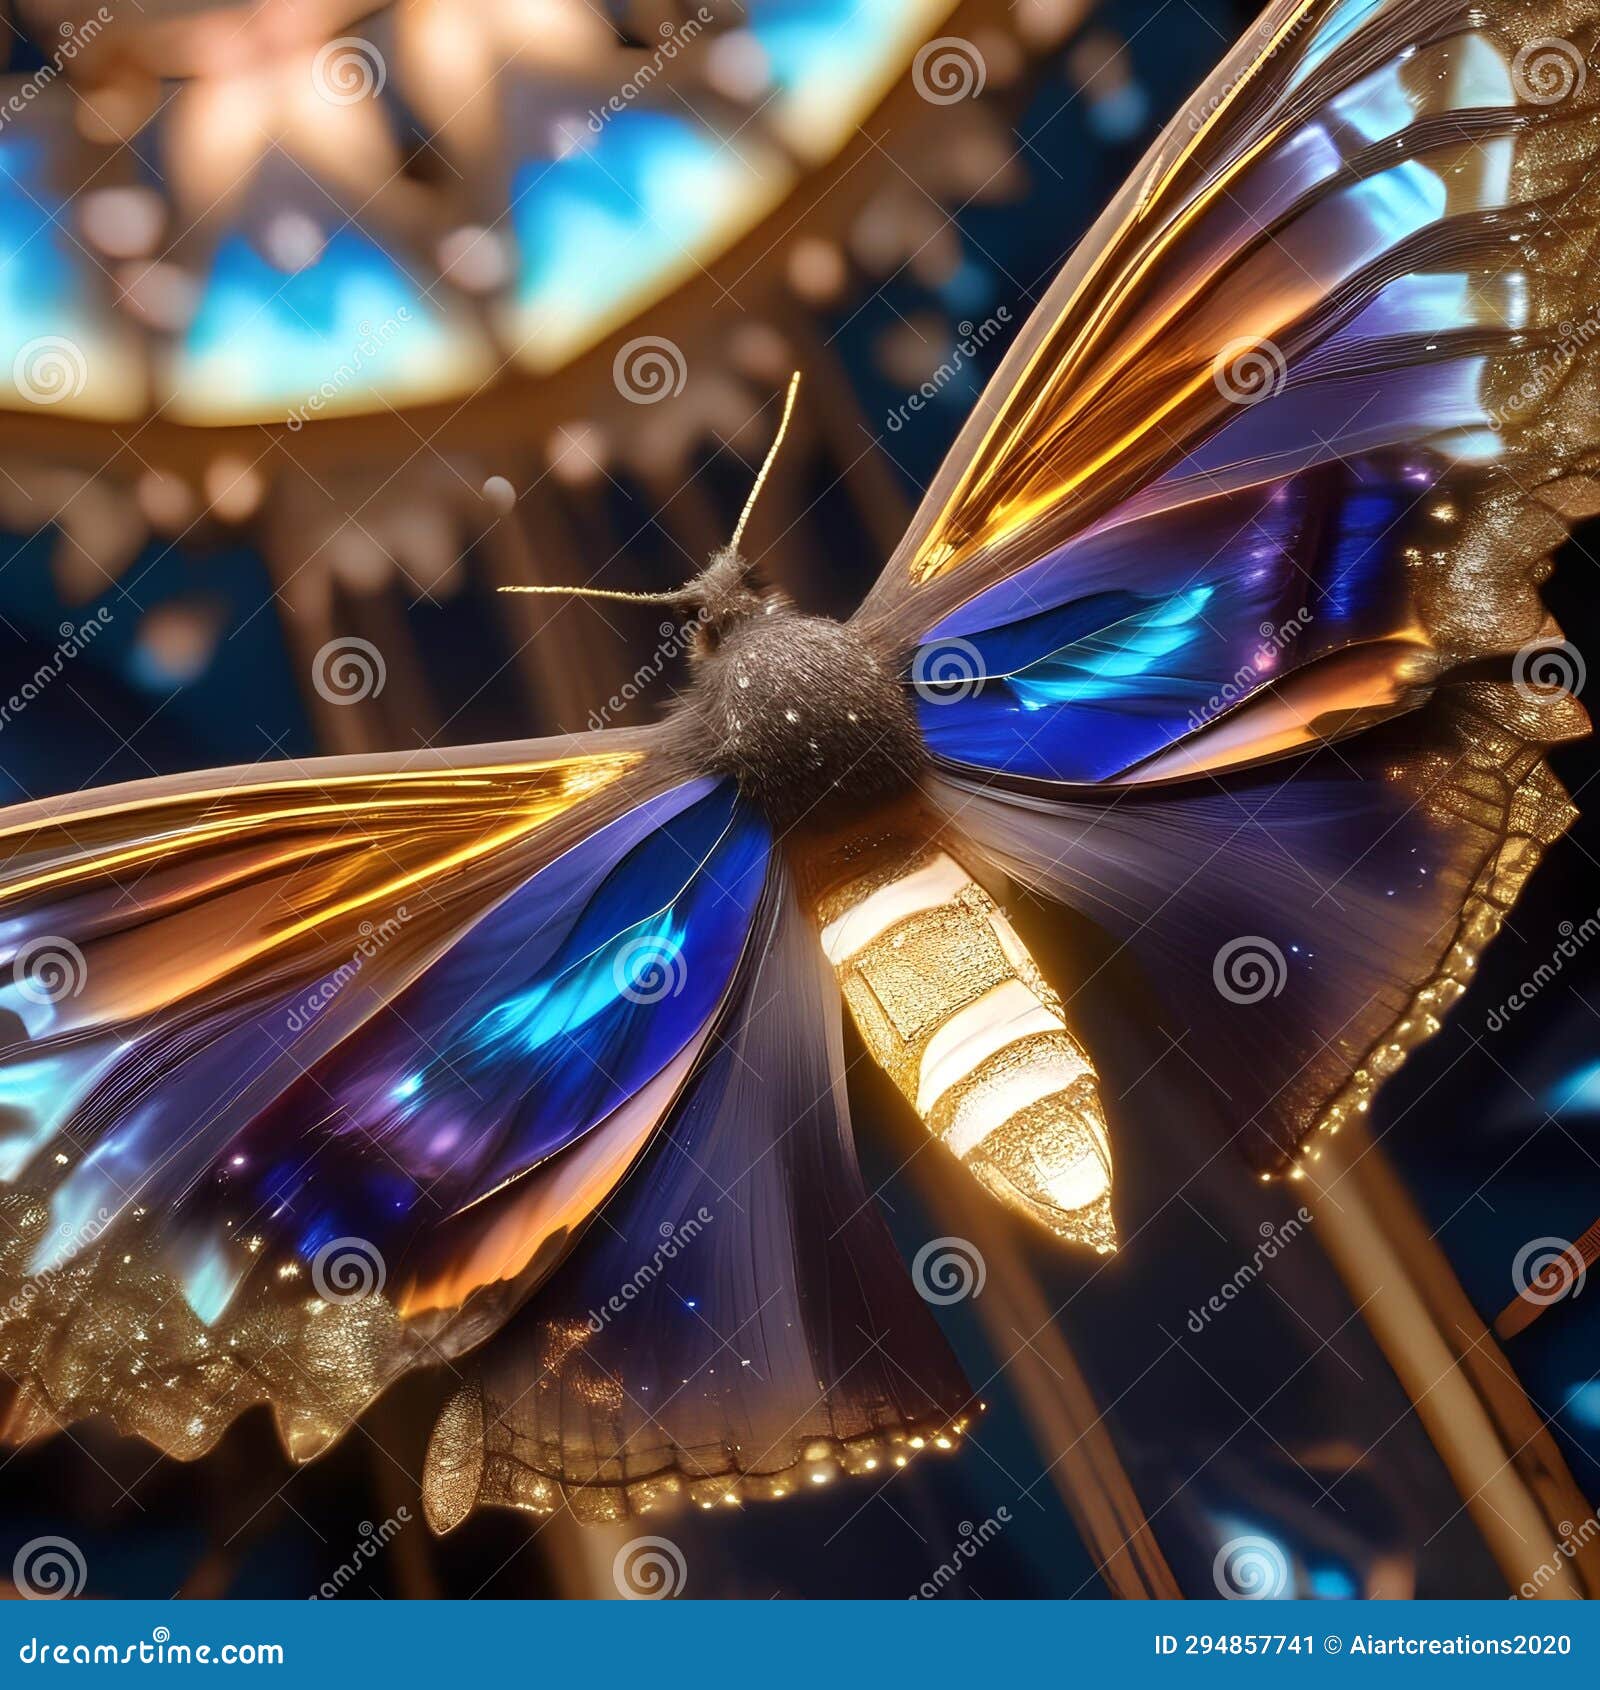 a luminous, crystalline moth with wings of pulsing quasars, fluttering among the stars1